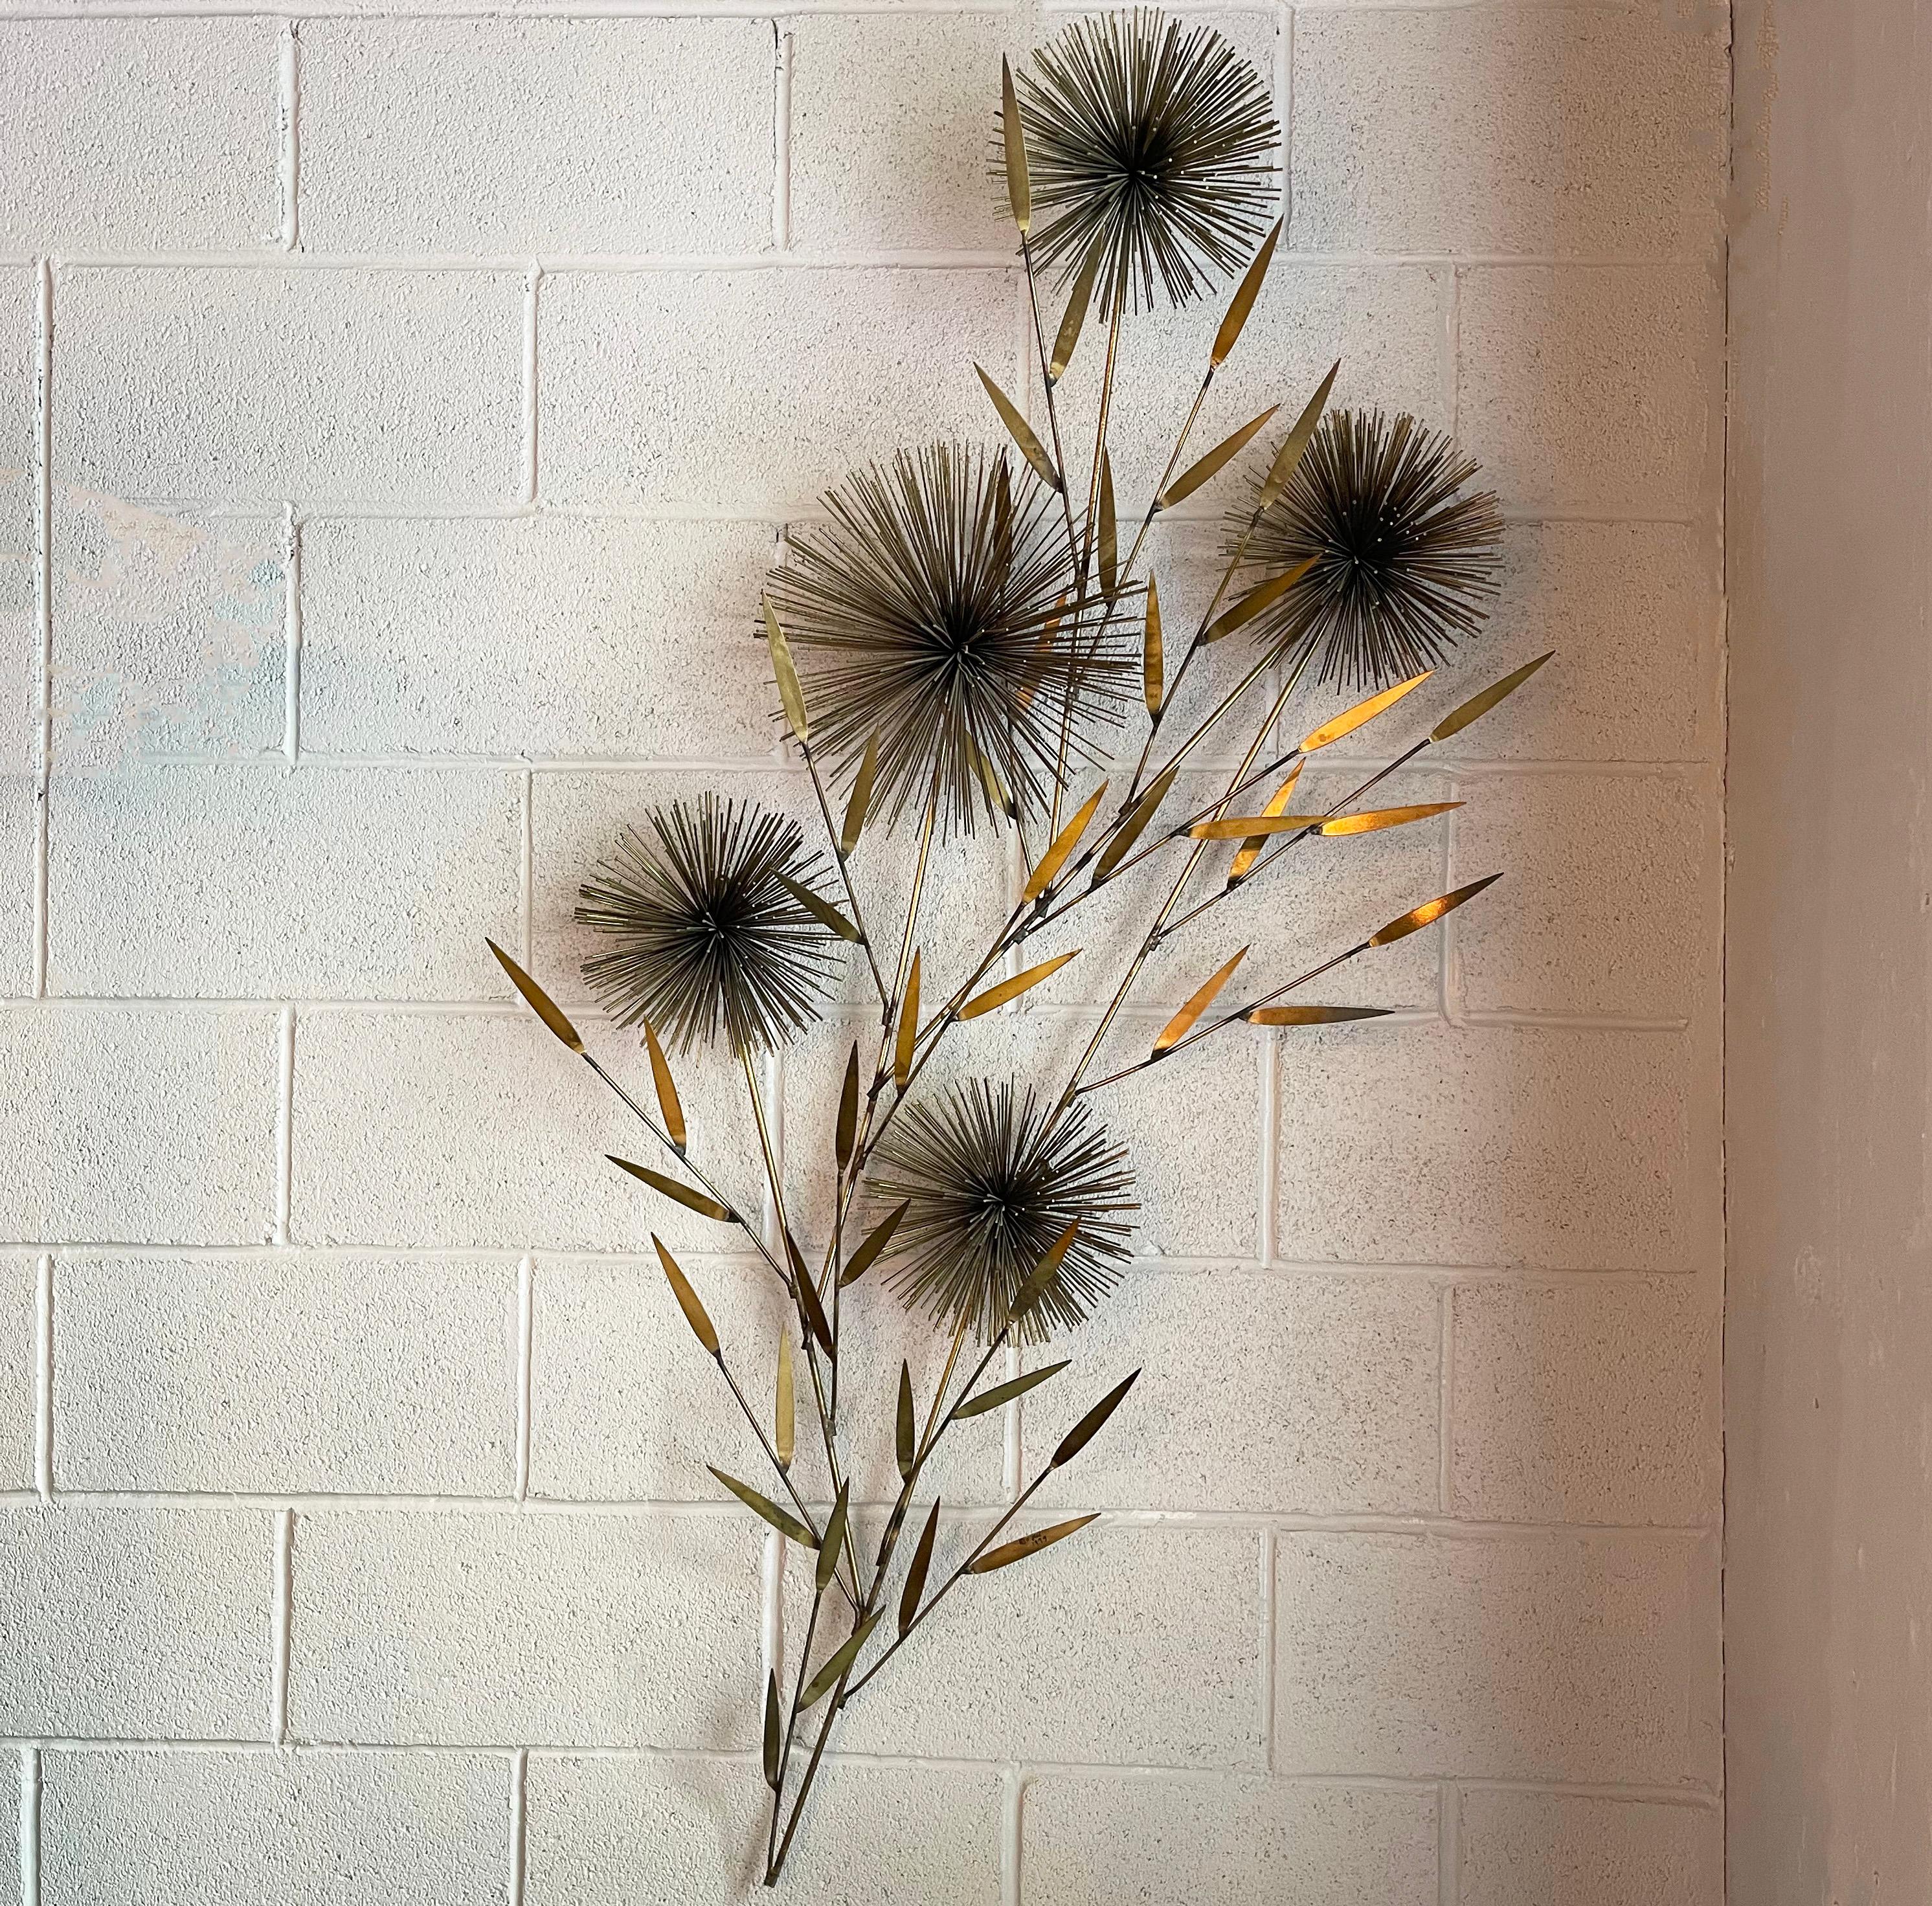 Large, midcentury modern, floral motif, brass wall mounted sculpture by Curtis Jeré features five cascading pom-pom flowers amid delicate leaves. 